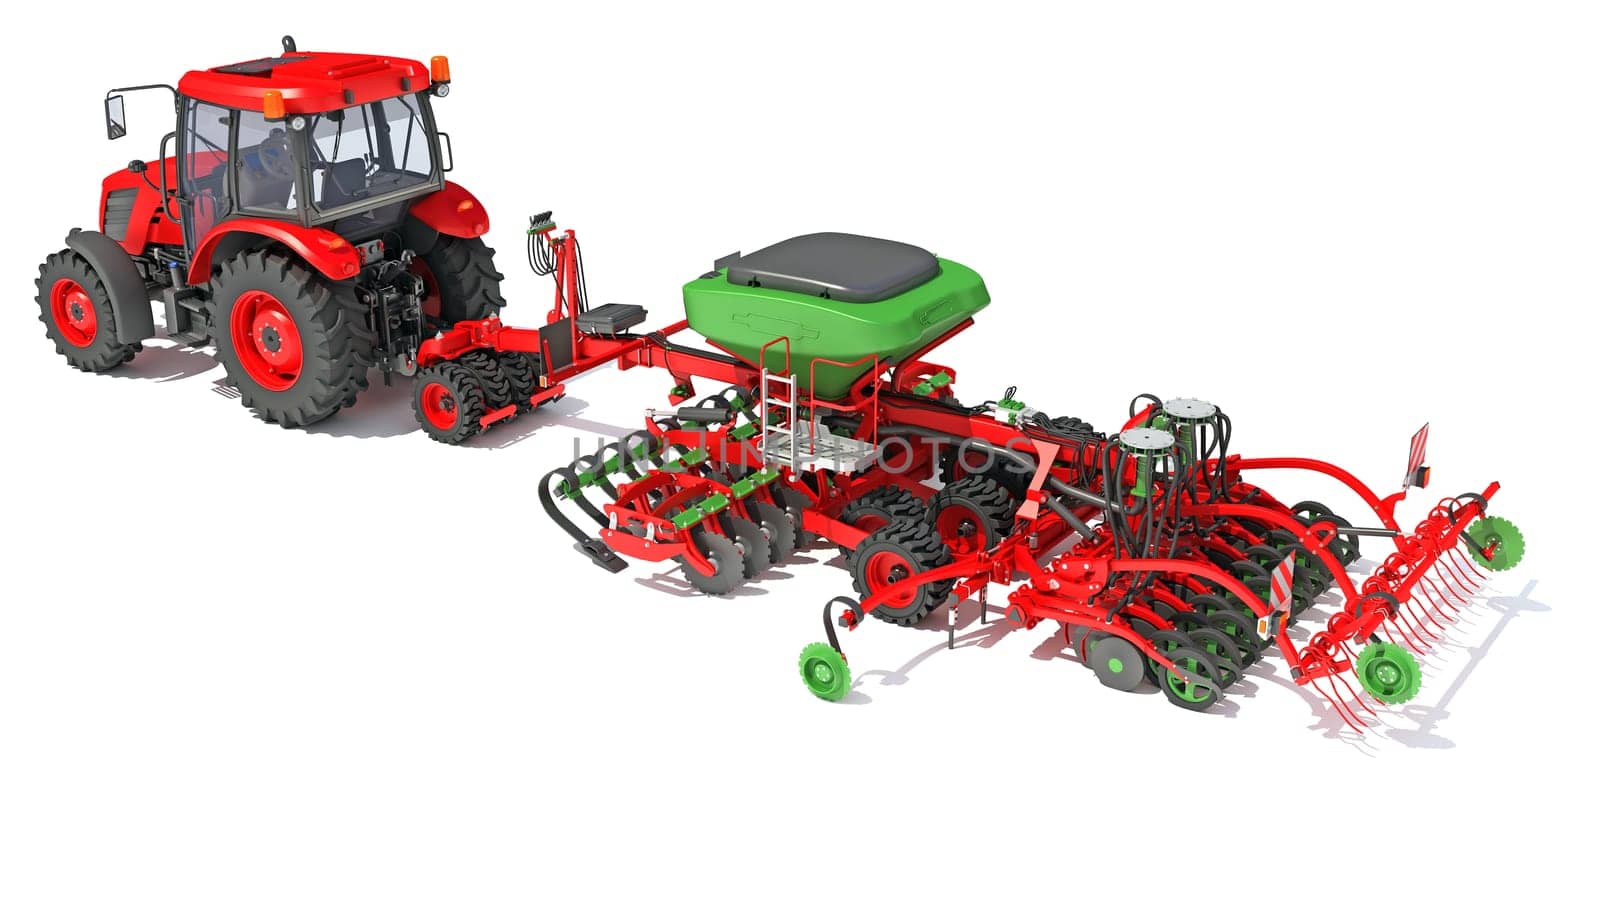 Tractor with Seed Drill farm equipment disc harrow 3D rendering on white background by 3DHorse